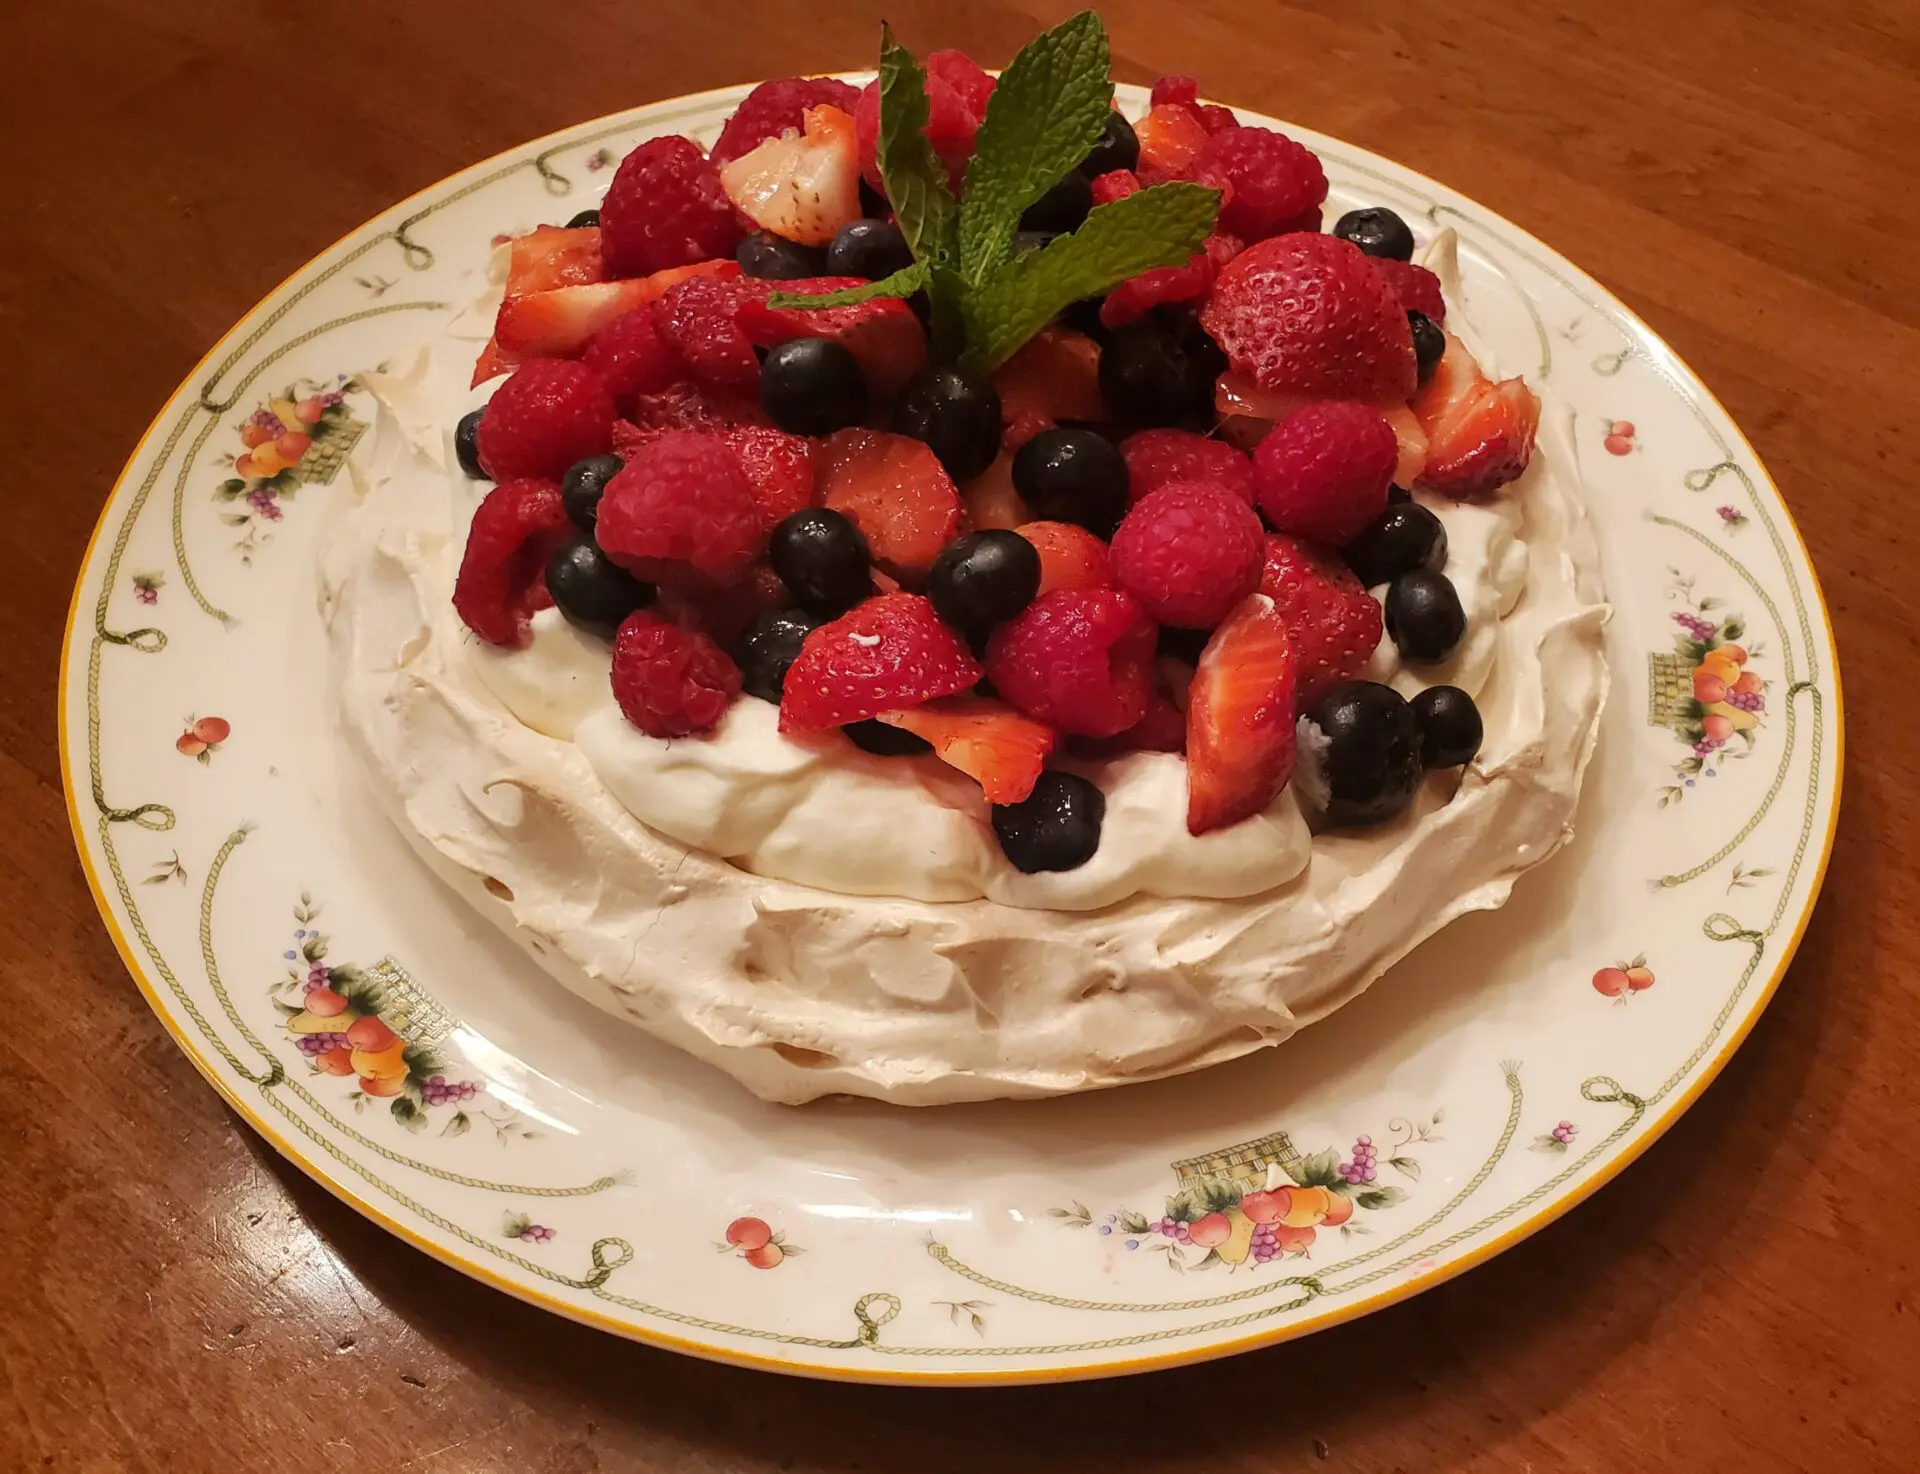 The Friday Baking Project featuring Pavlova with berries and mint.